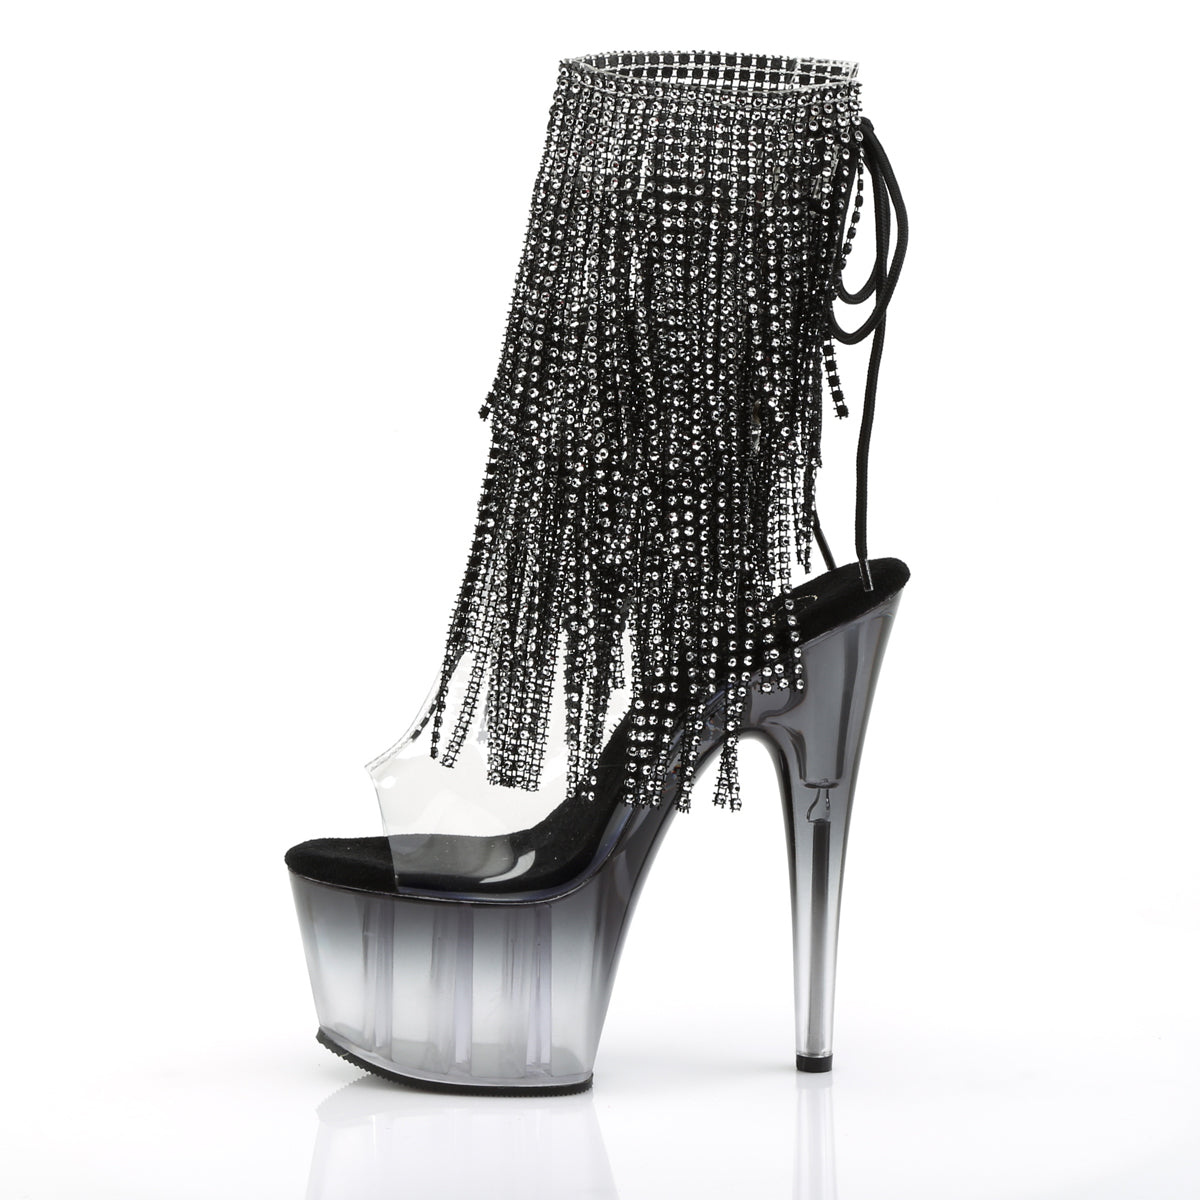 ADORE-1017RSFT 7" Heel Clear Black Pole Dancing Ankle Boots-Pleaser- Sexy Shoes Pole Dance Heels